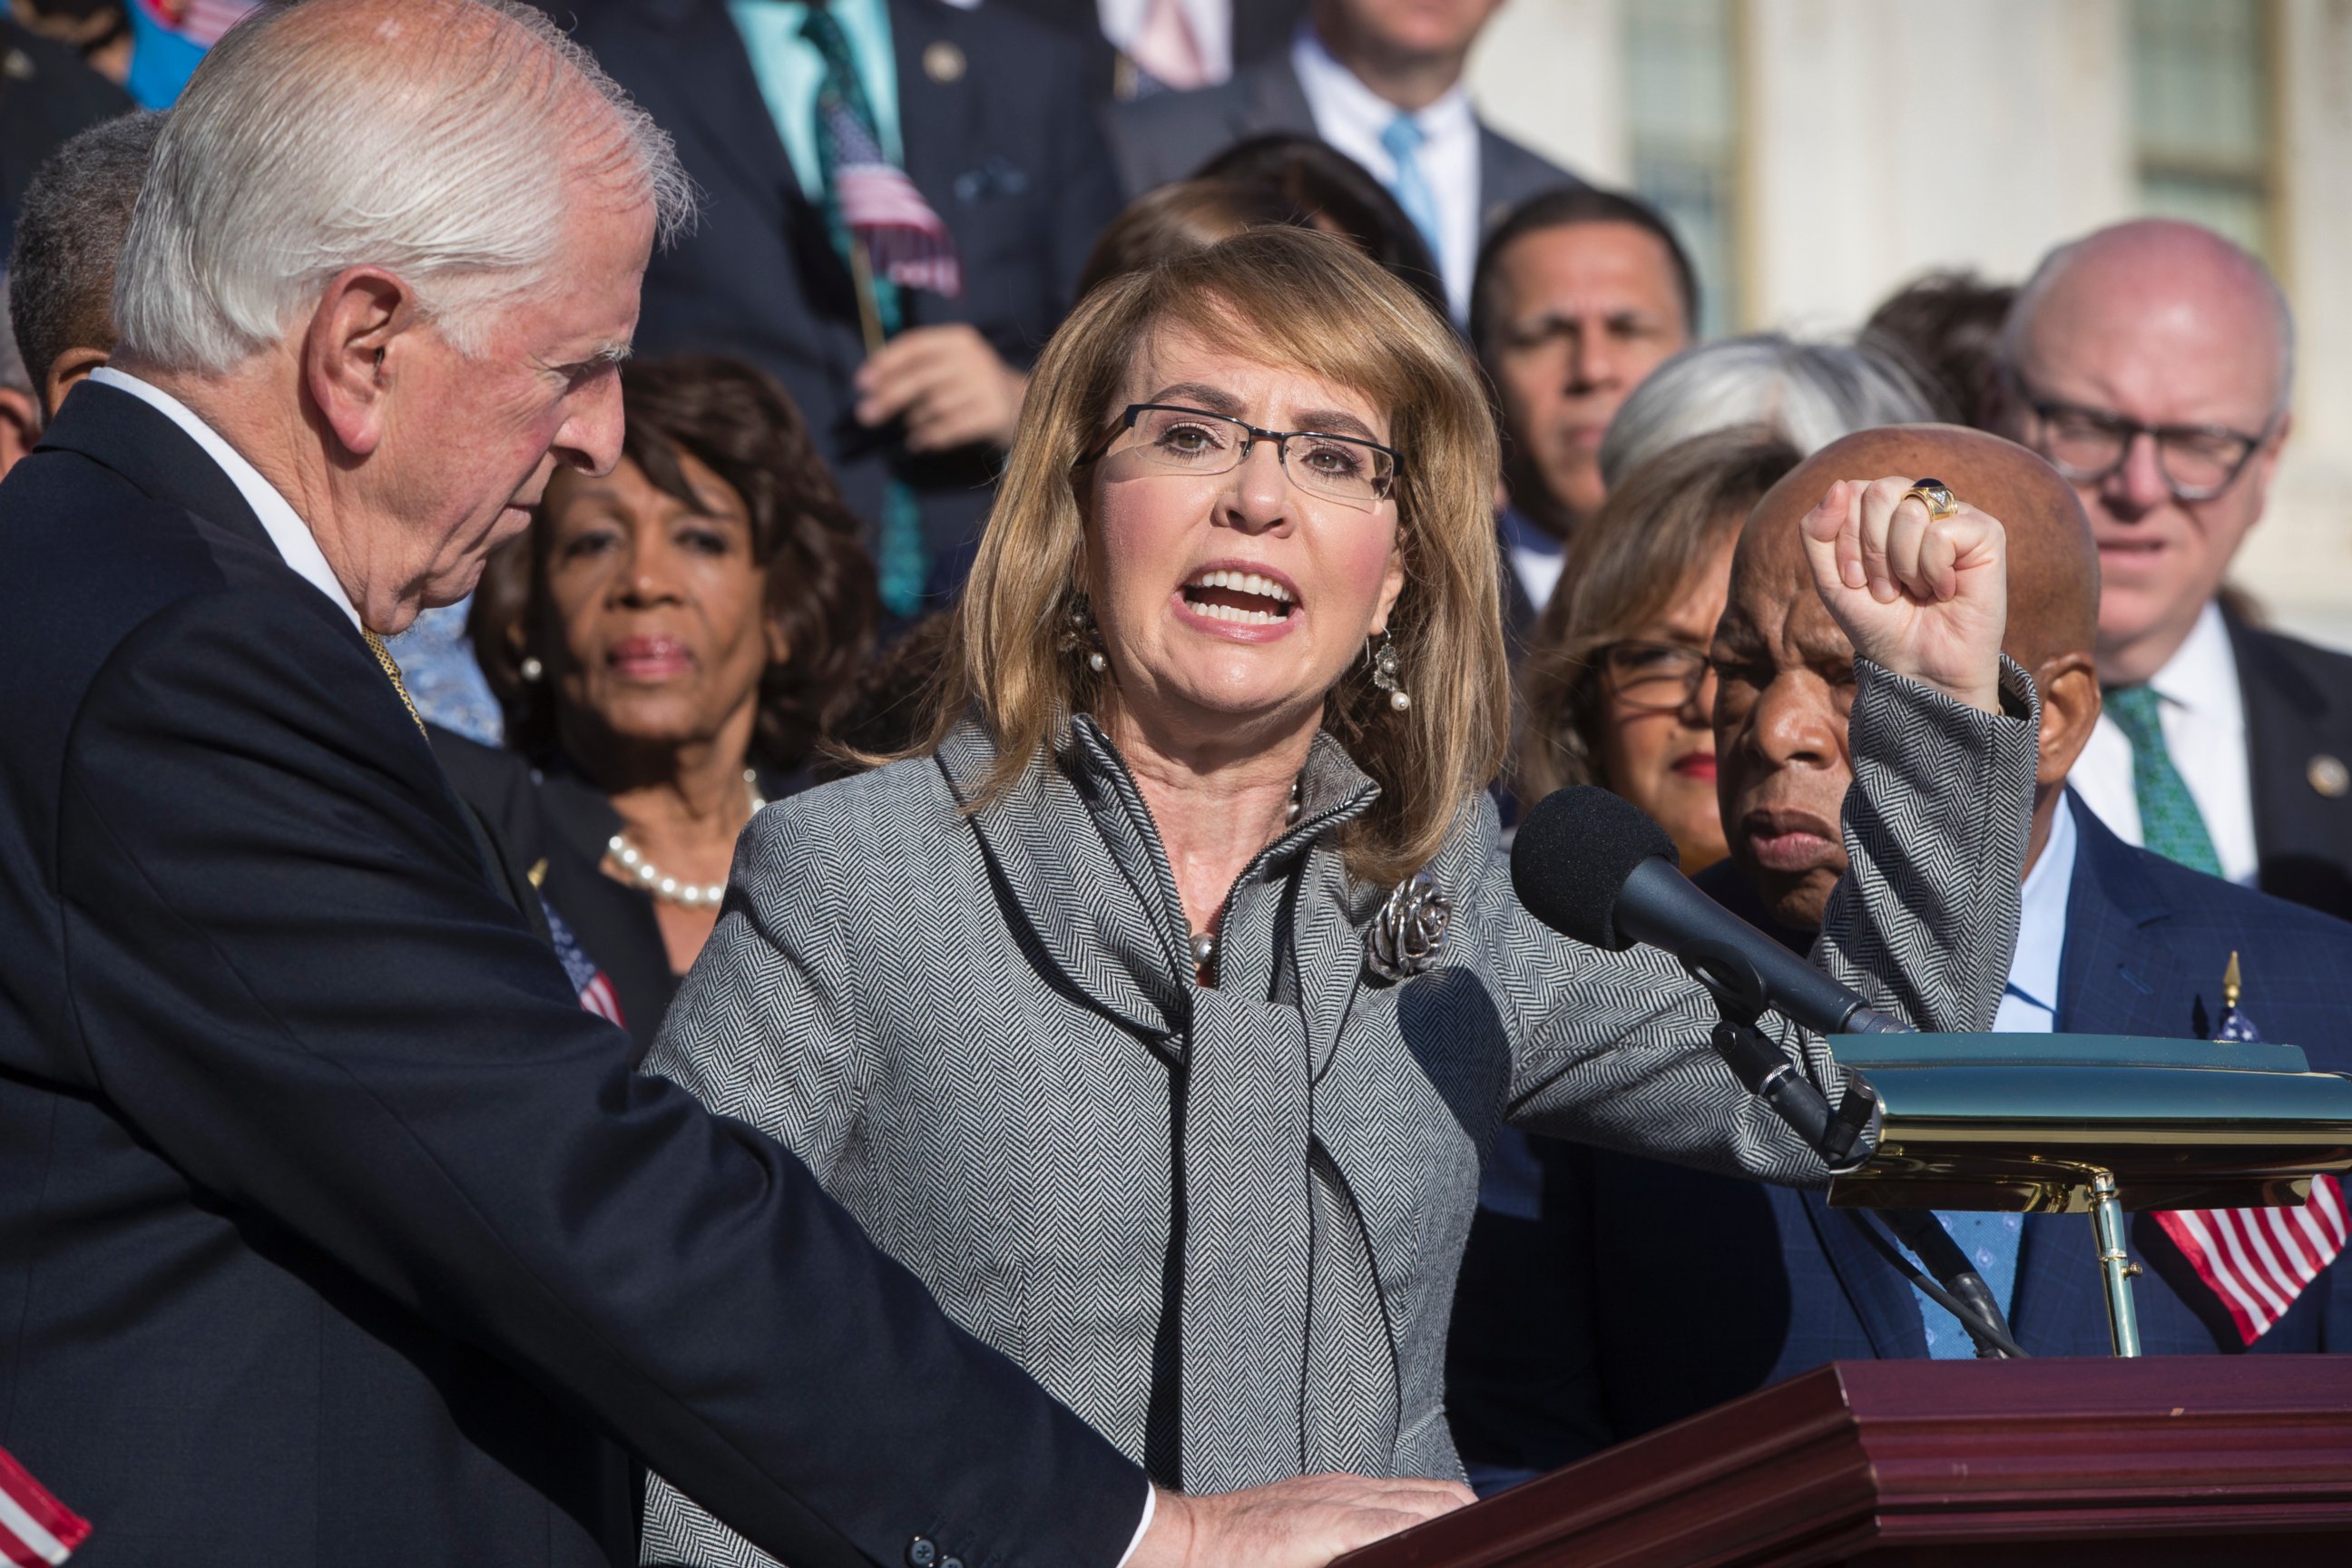 Former Rep. Gabby Giffords of Arizona who survived an assassination attempt in 2011, joins Democrats in a call for action on gun safety Wednesday morning after the deadly mass shooting in Las Vegas, at the Capitol in Washington, Wednesday, Oct. 4, 2017.